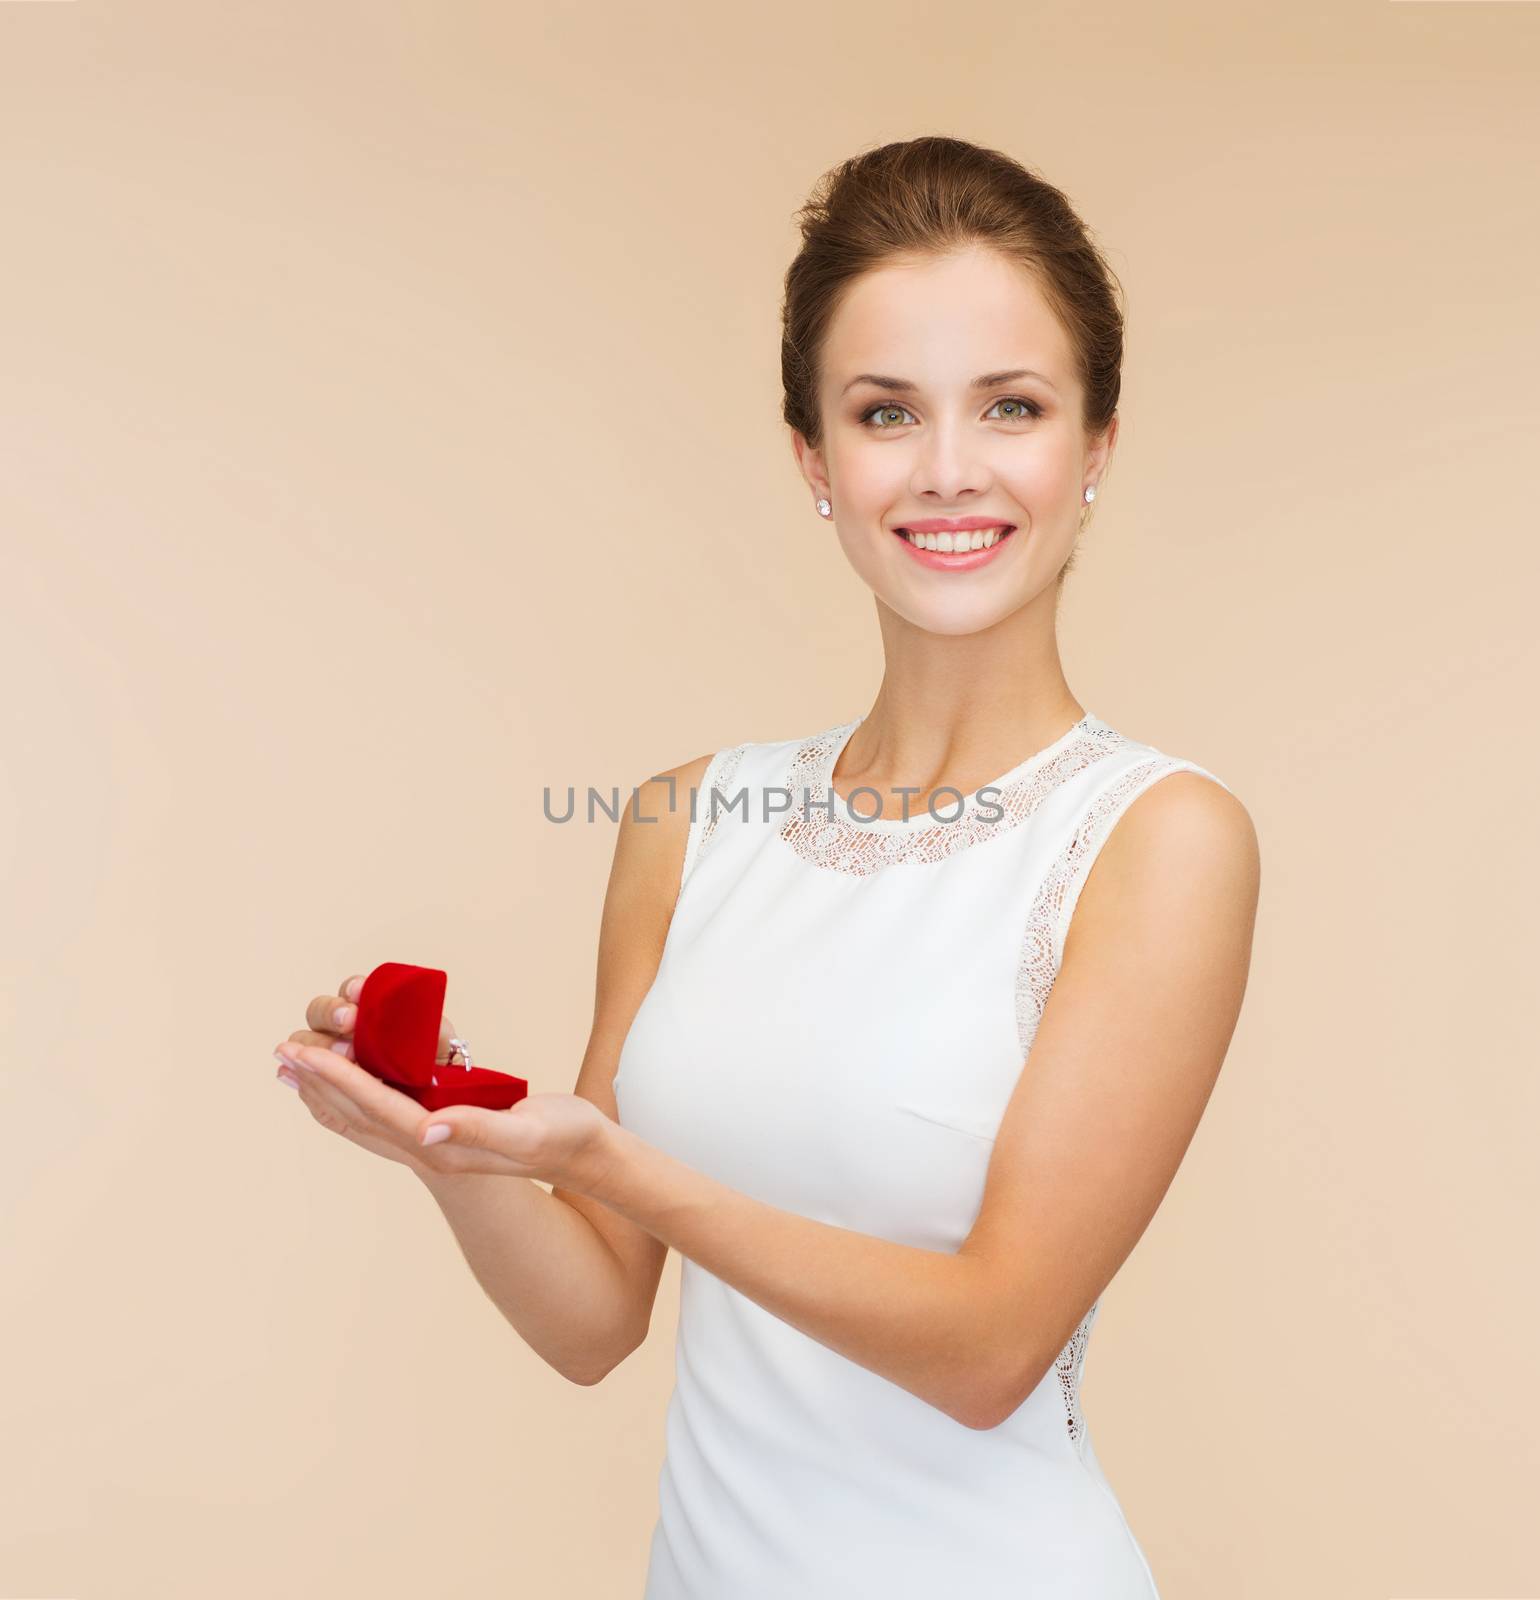 wedding, love, engagement and happiness concept - smiling woman in white dress holding red gift box with diamond ring over beige background